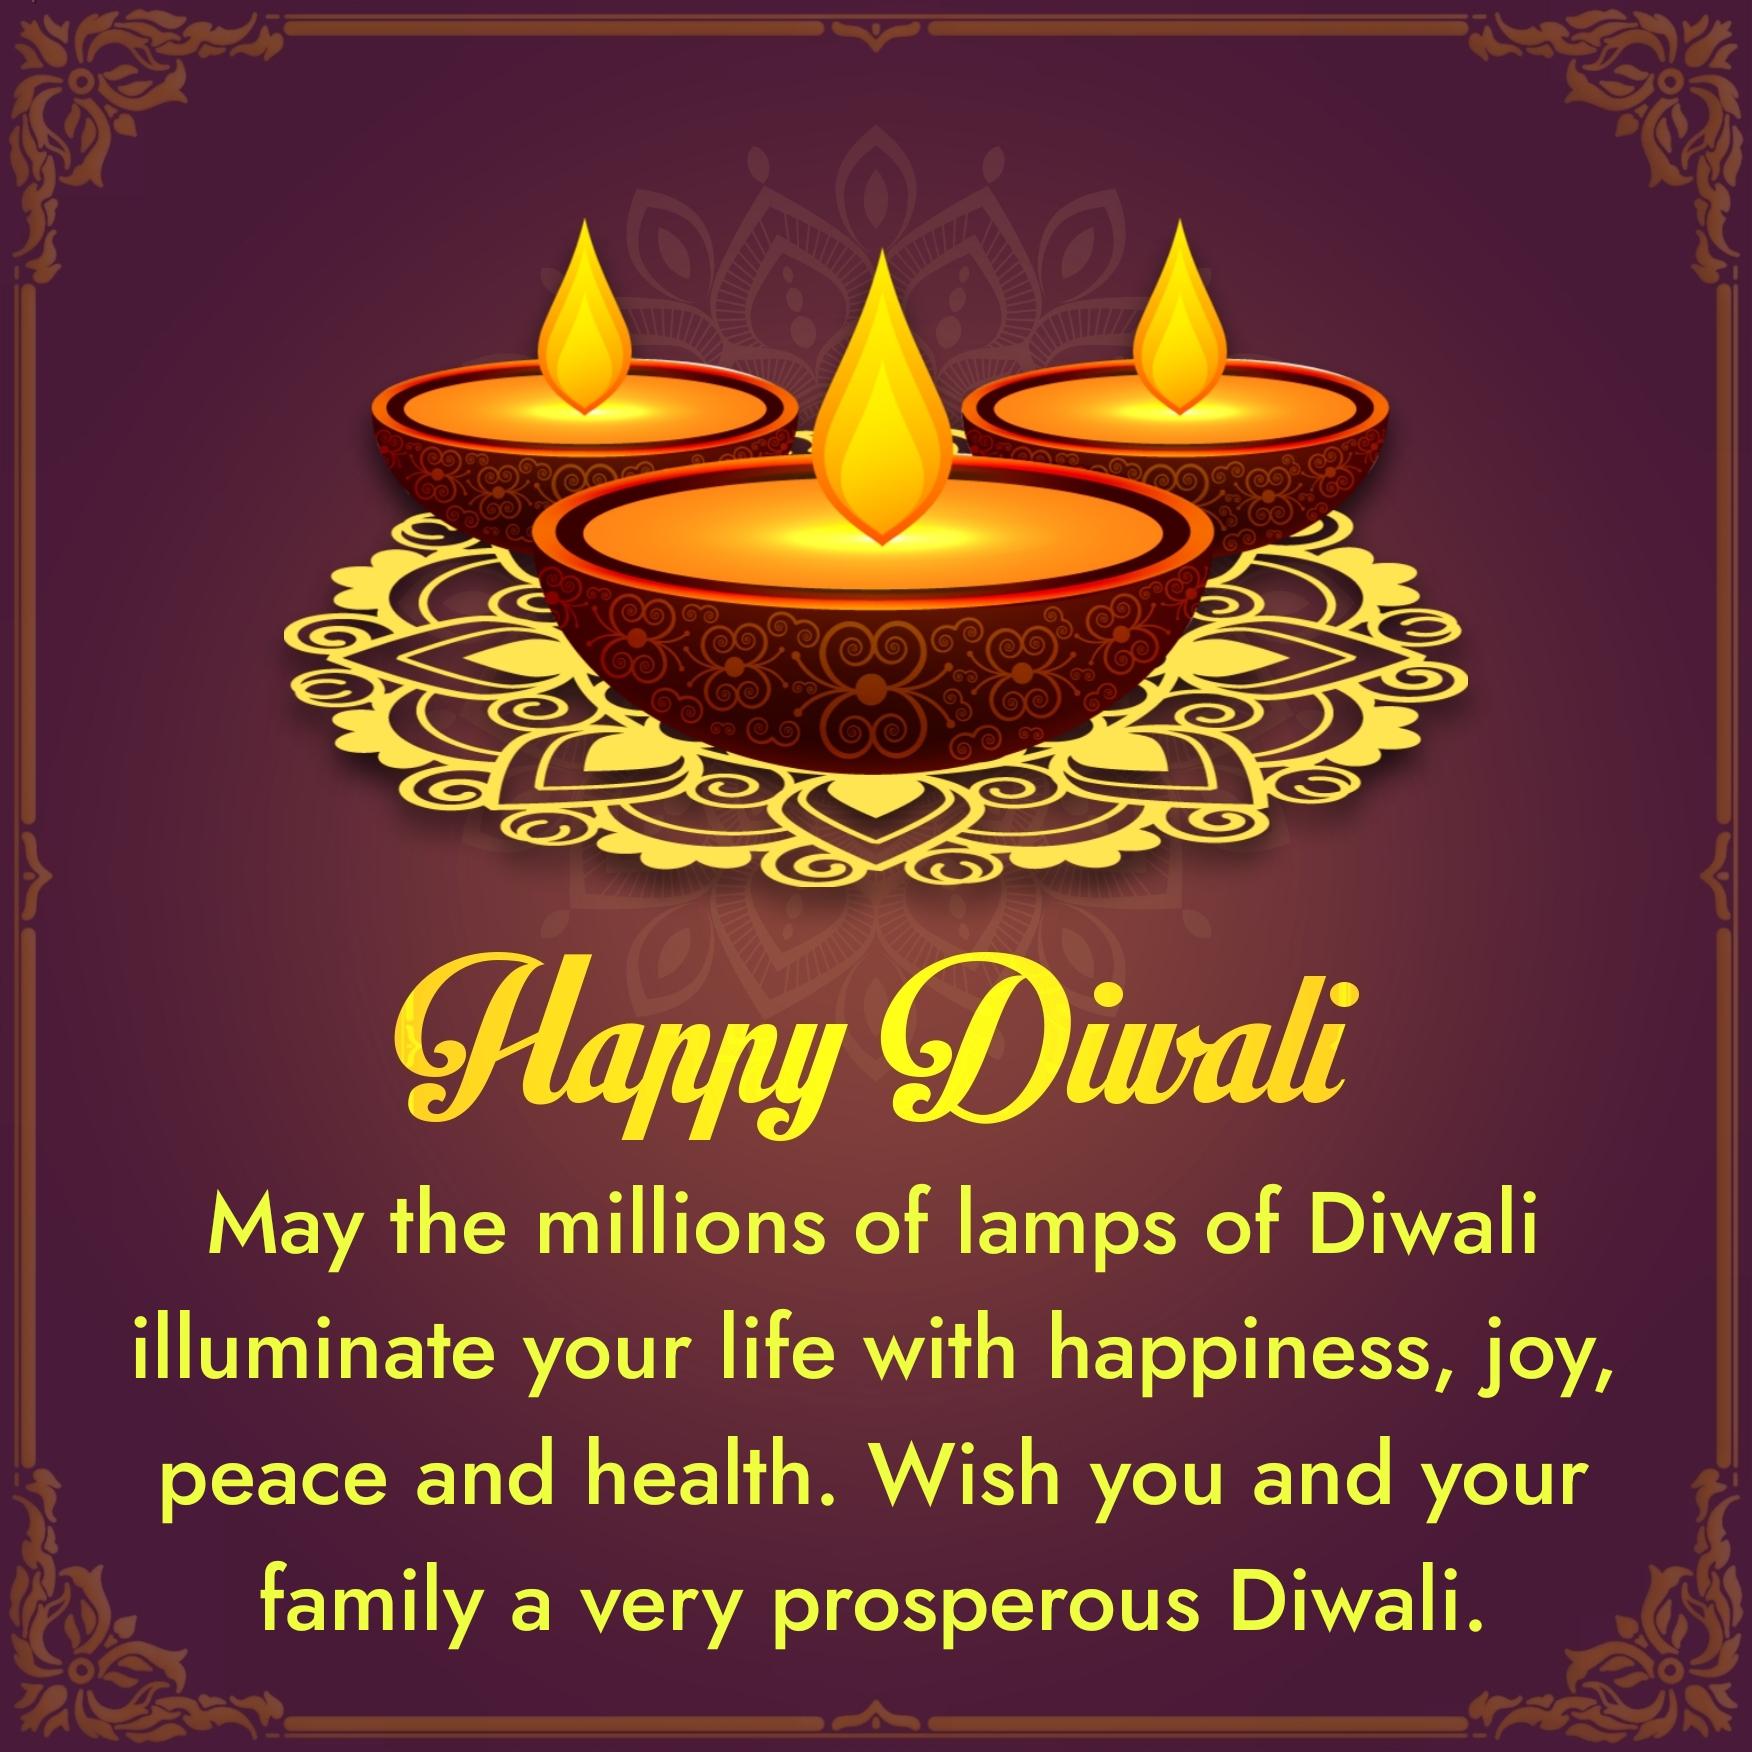 May the millions of lamps of Diwali illuminate your life